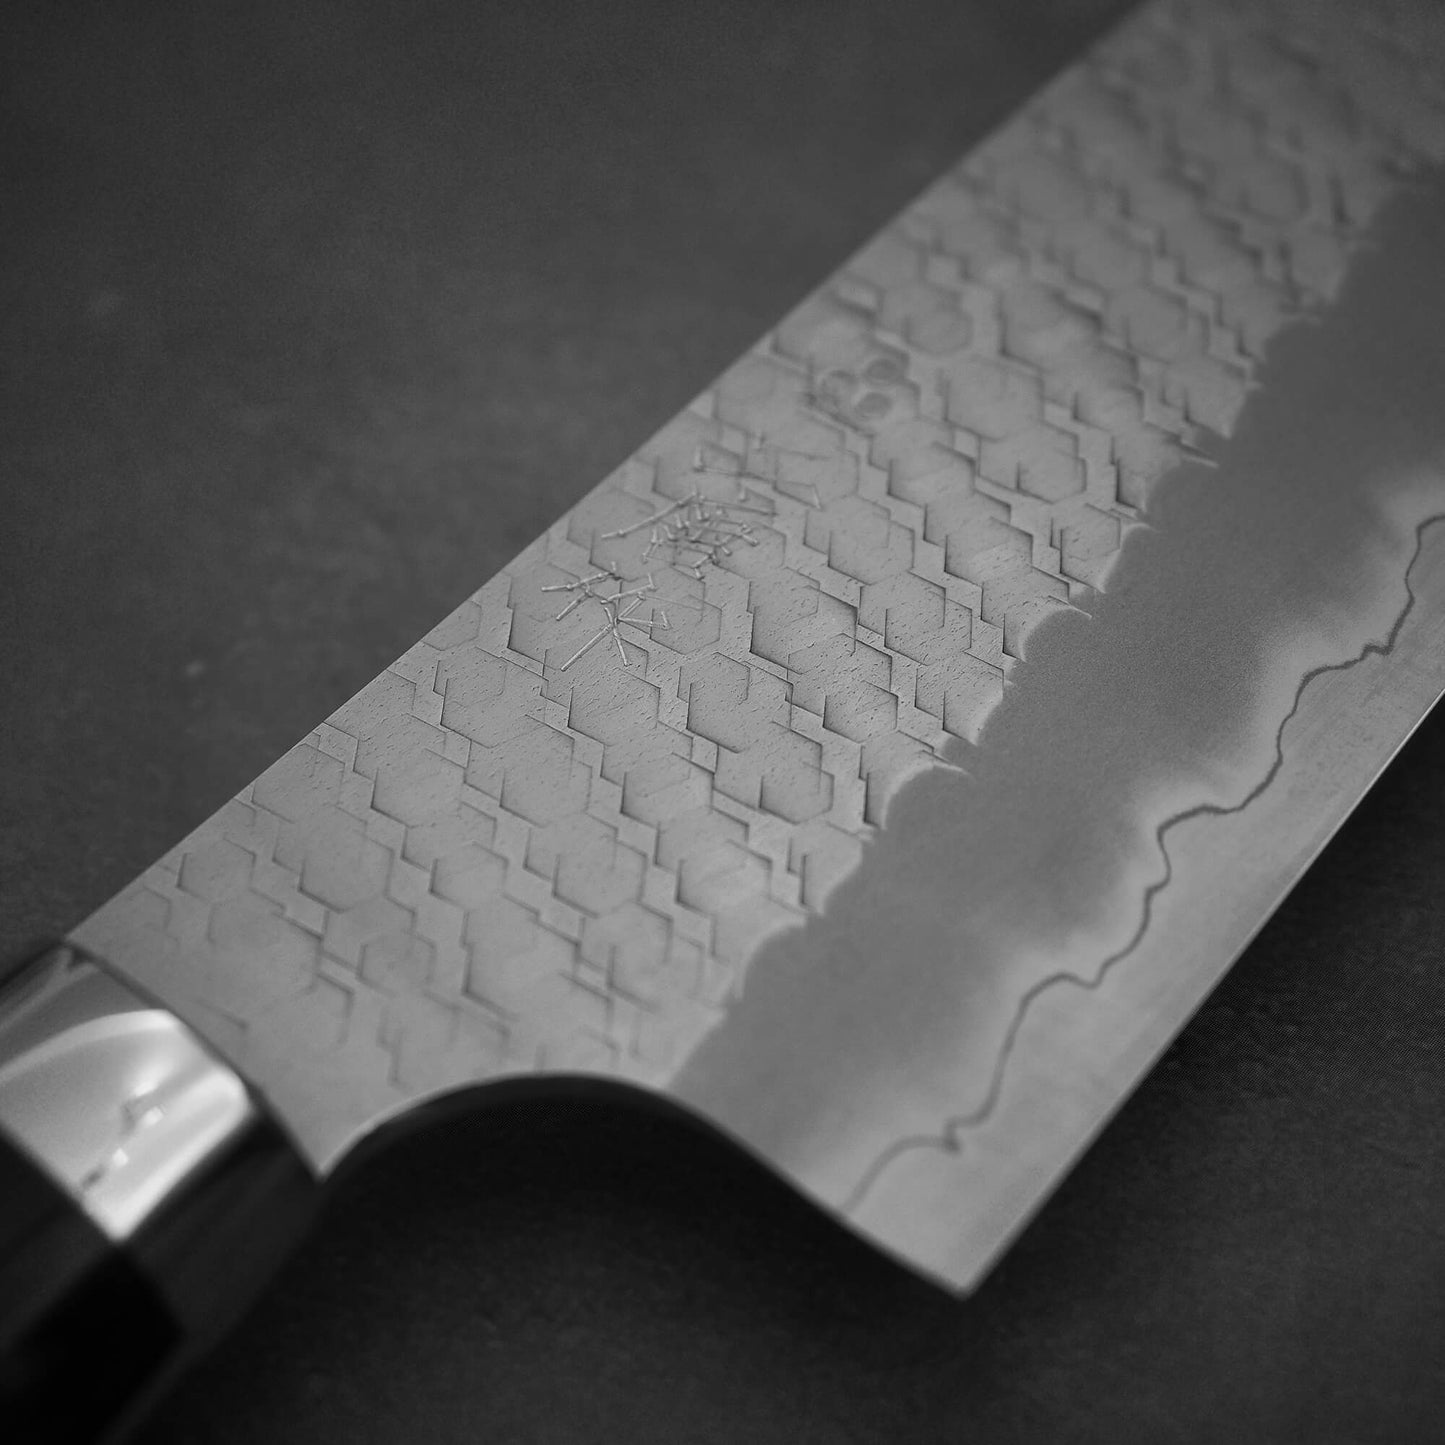 Close up view of 210mm Nigara tsuchime SG2 gyuto knife with blue handle